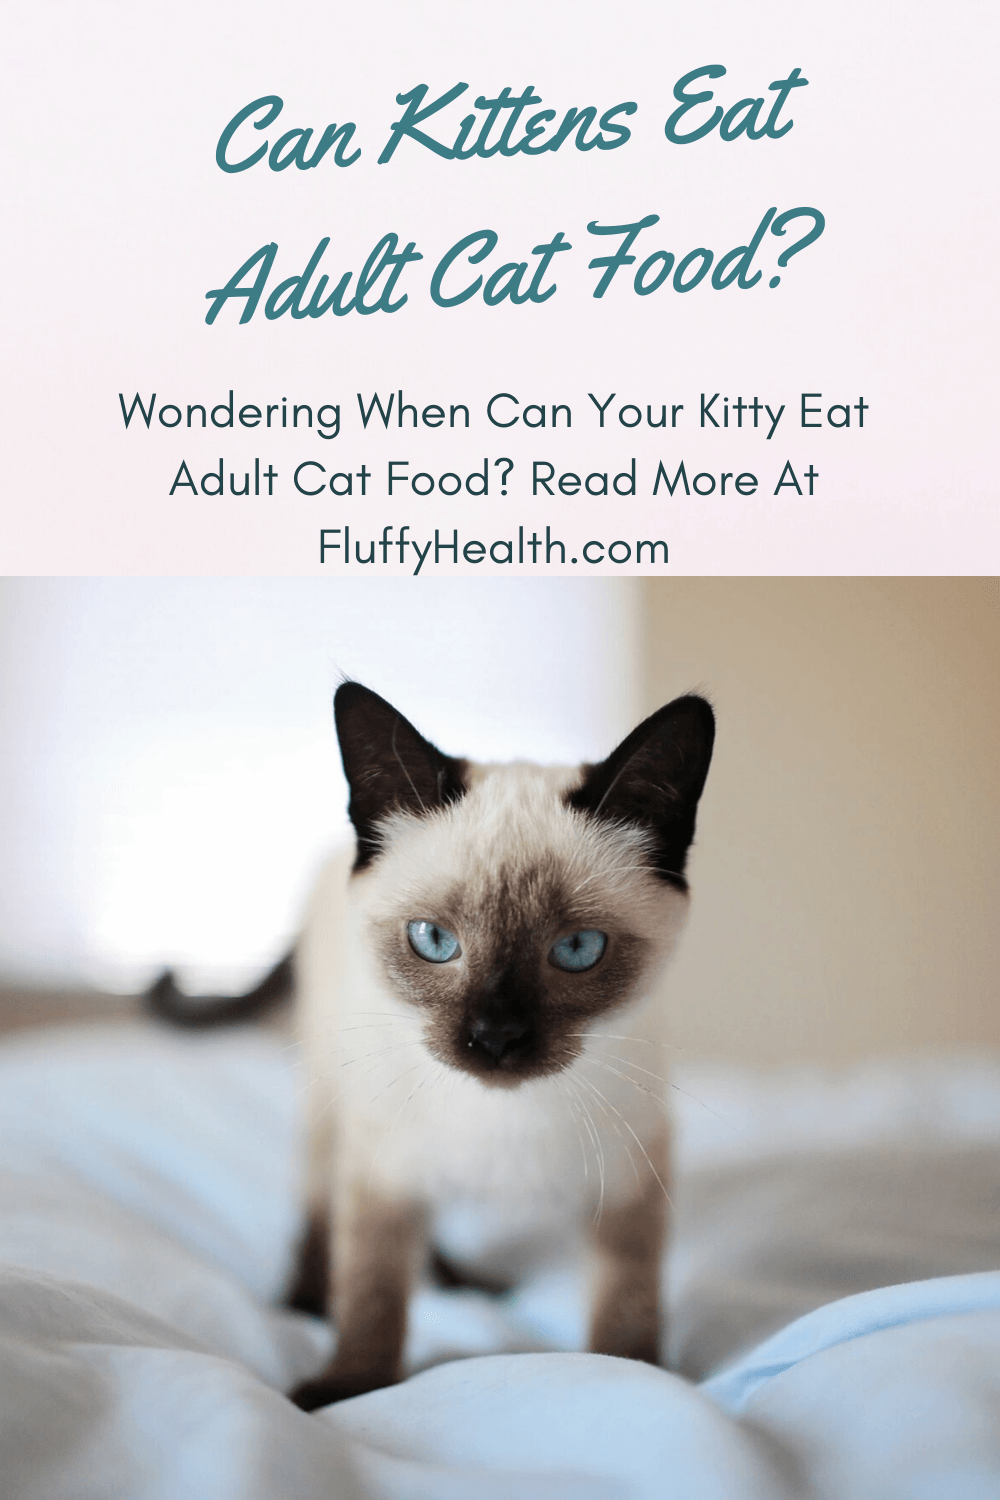 When Can Kittens Eat Adult Cat Food?